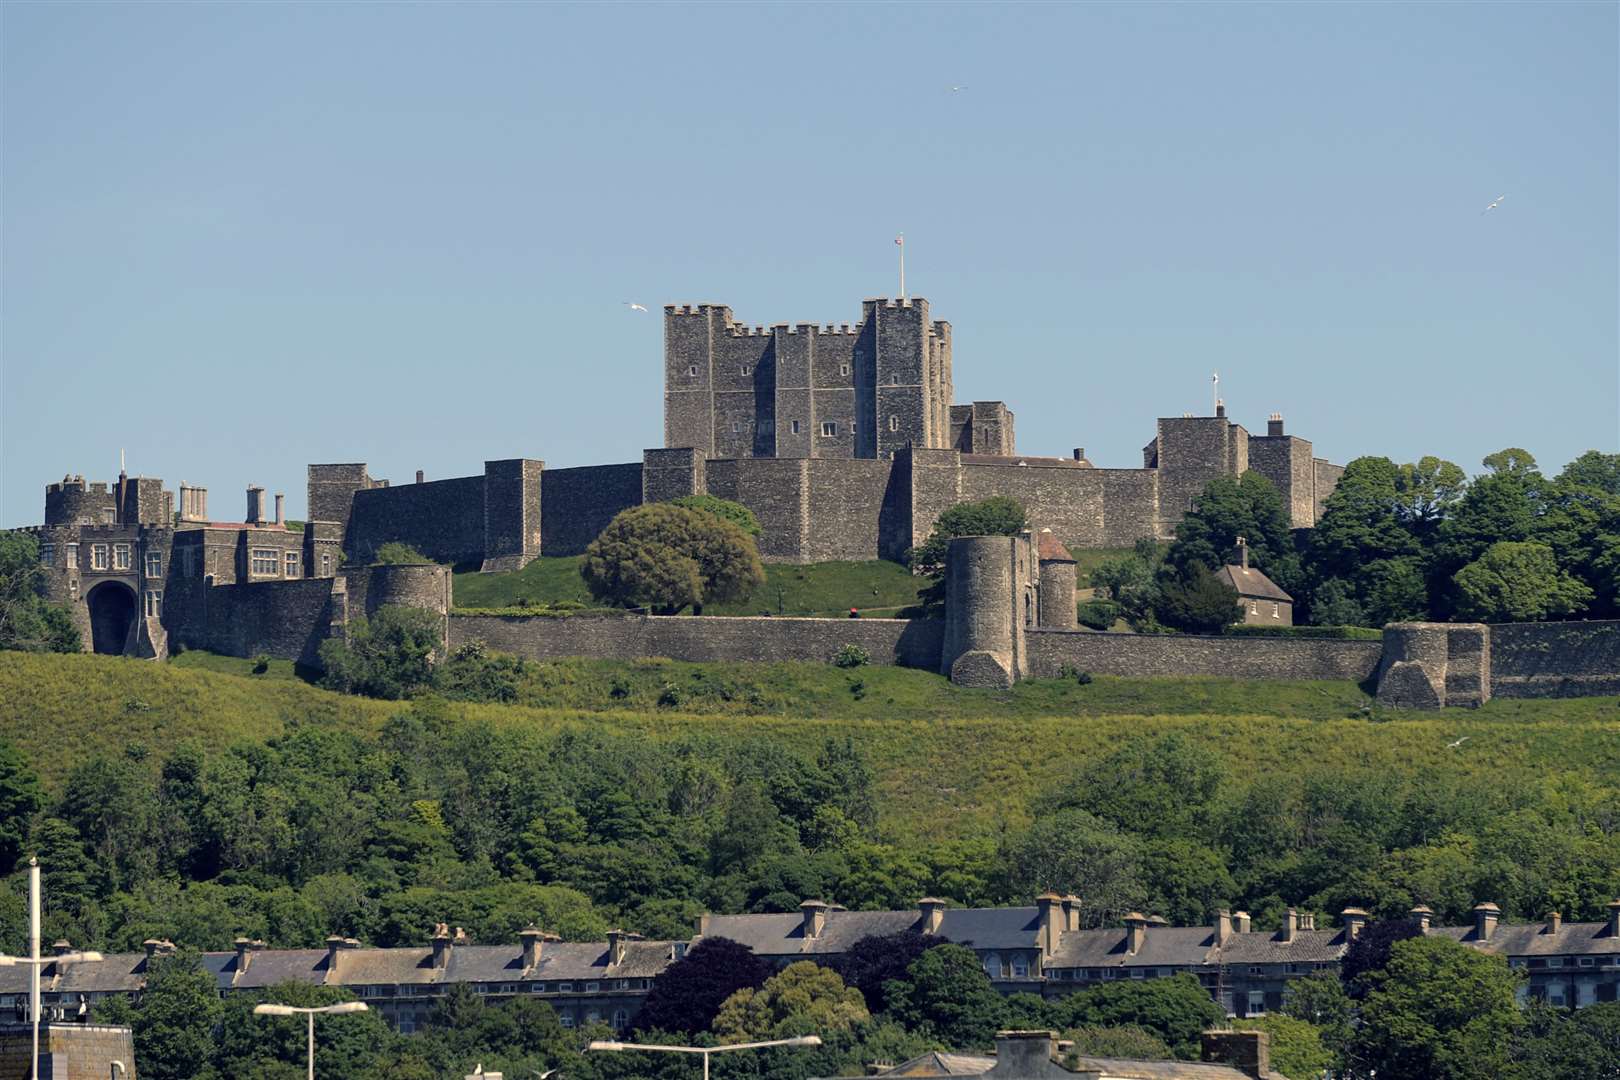 Dover Castle may be a touch bigger - but officers from its garrison are thought to have lived in the house